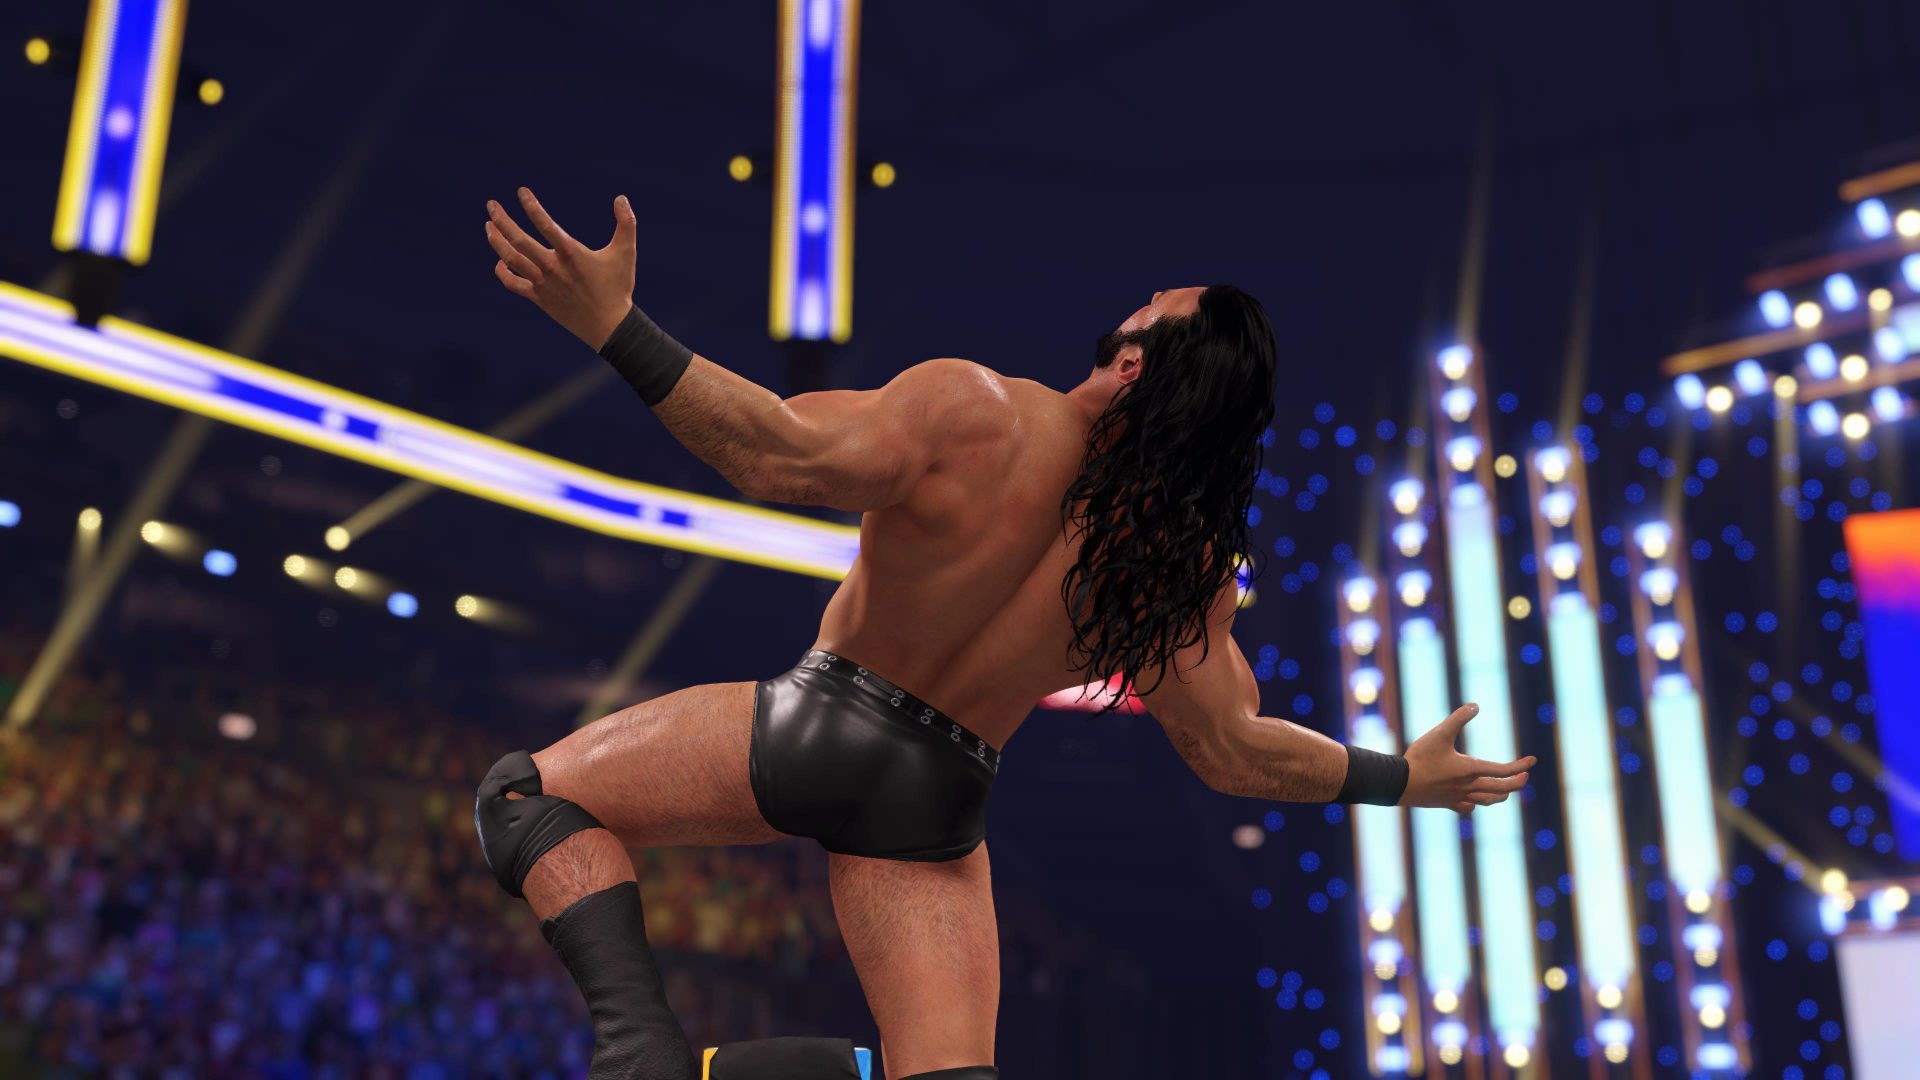 WWE 2K22 Review (PS5)